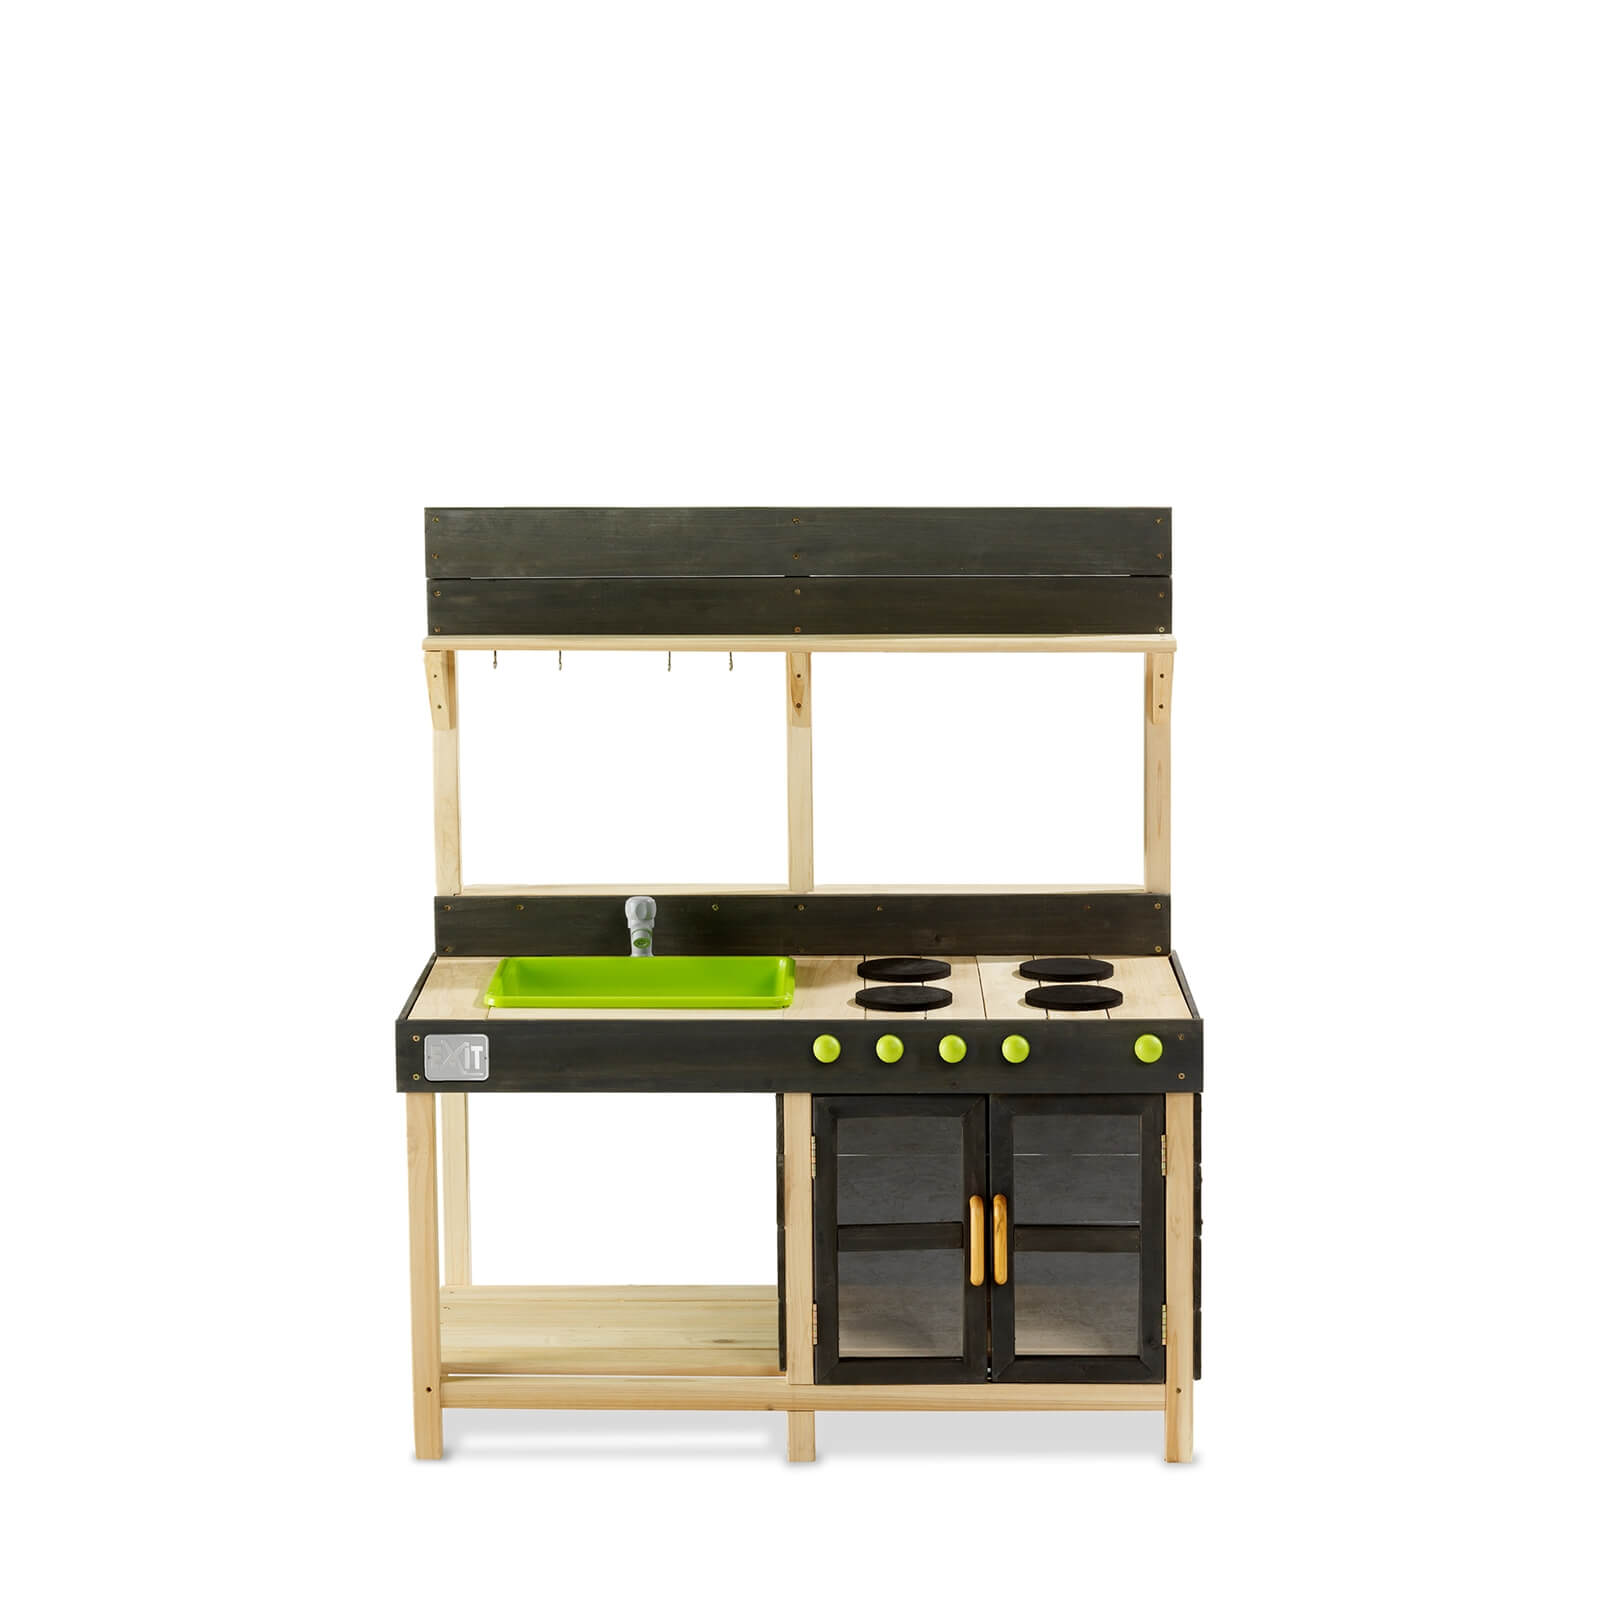 Exit Yummy Outdoor Play Kitchen 200